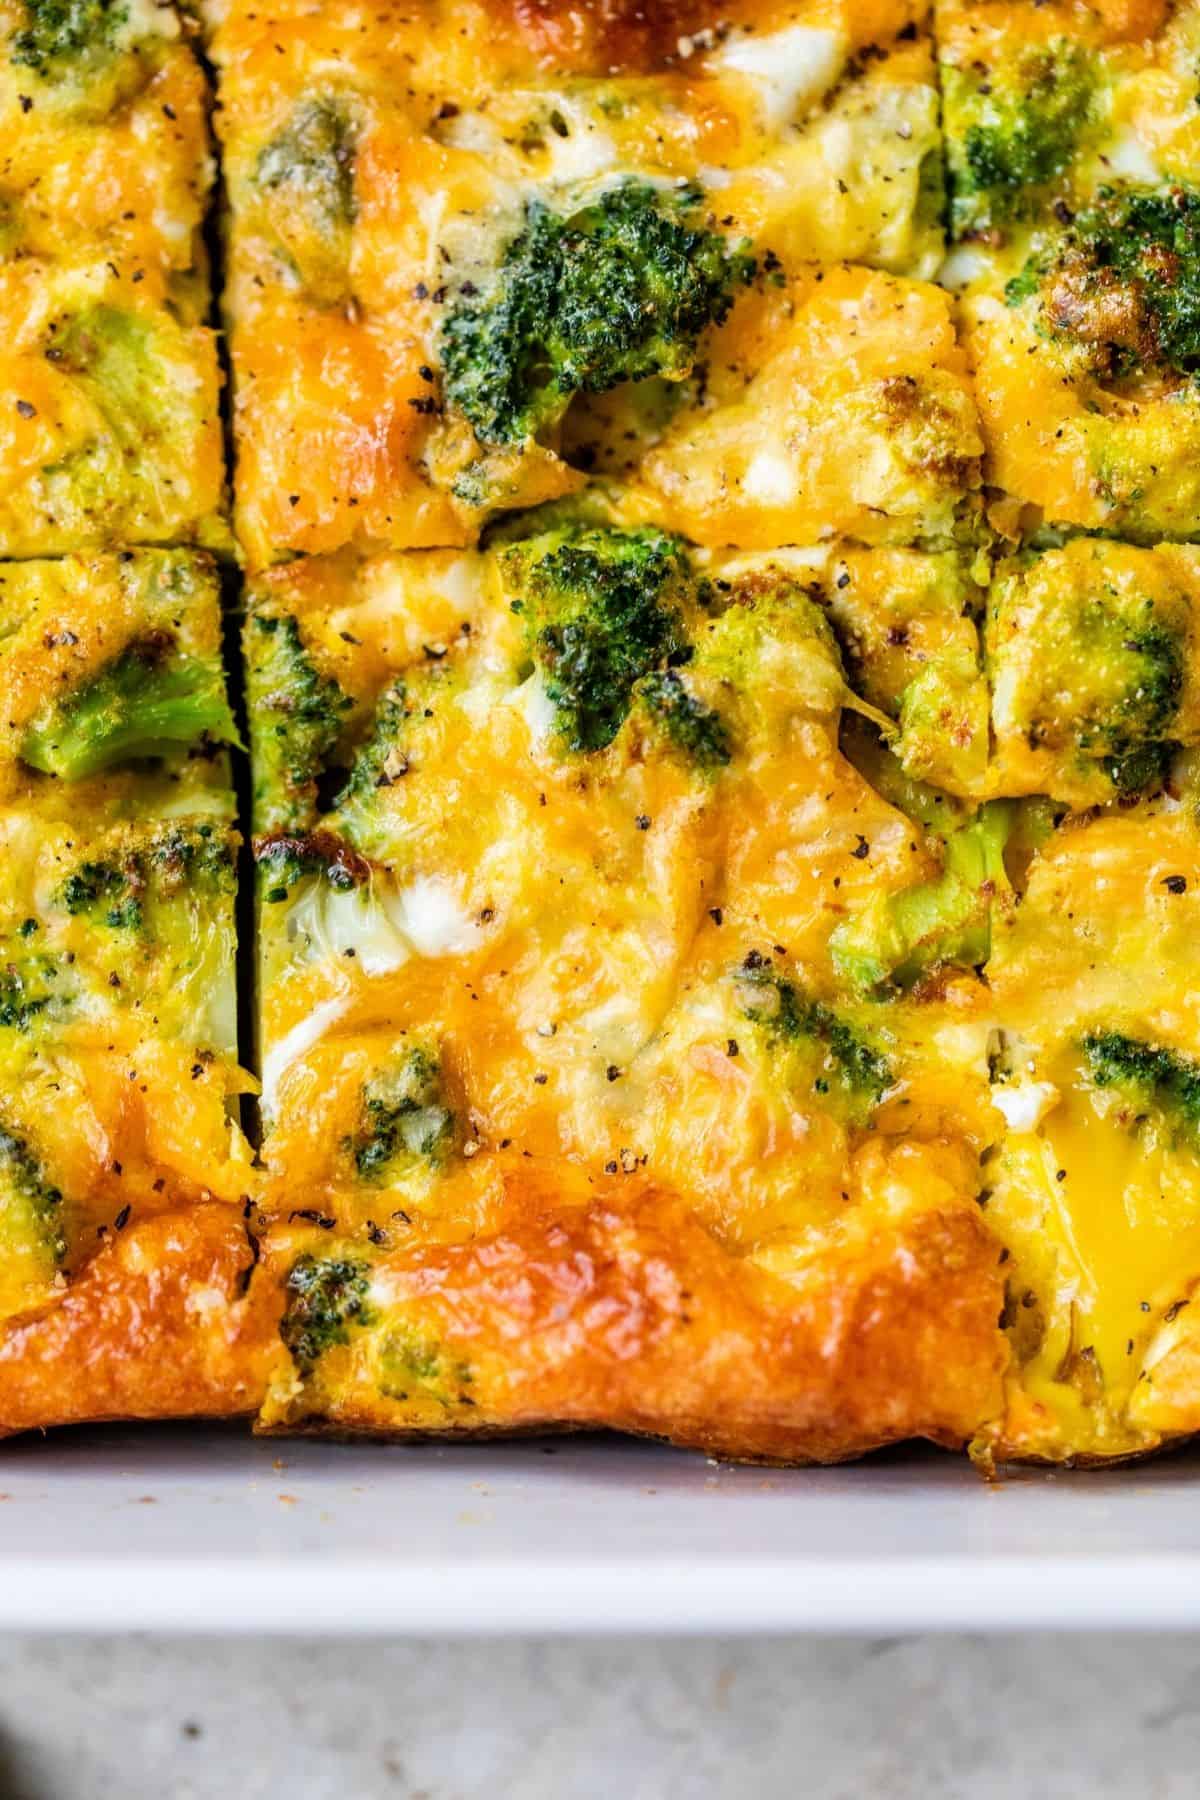 egg bake with cheese and broccoli, cut into squares